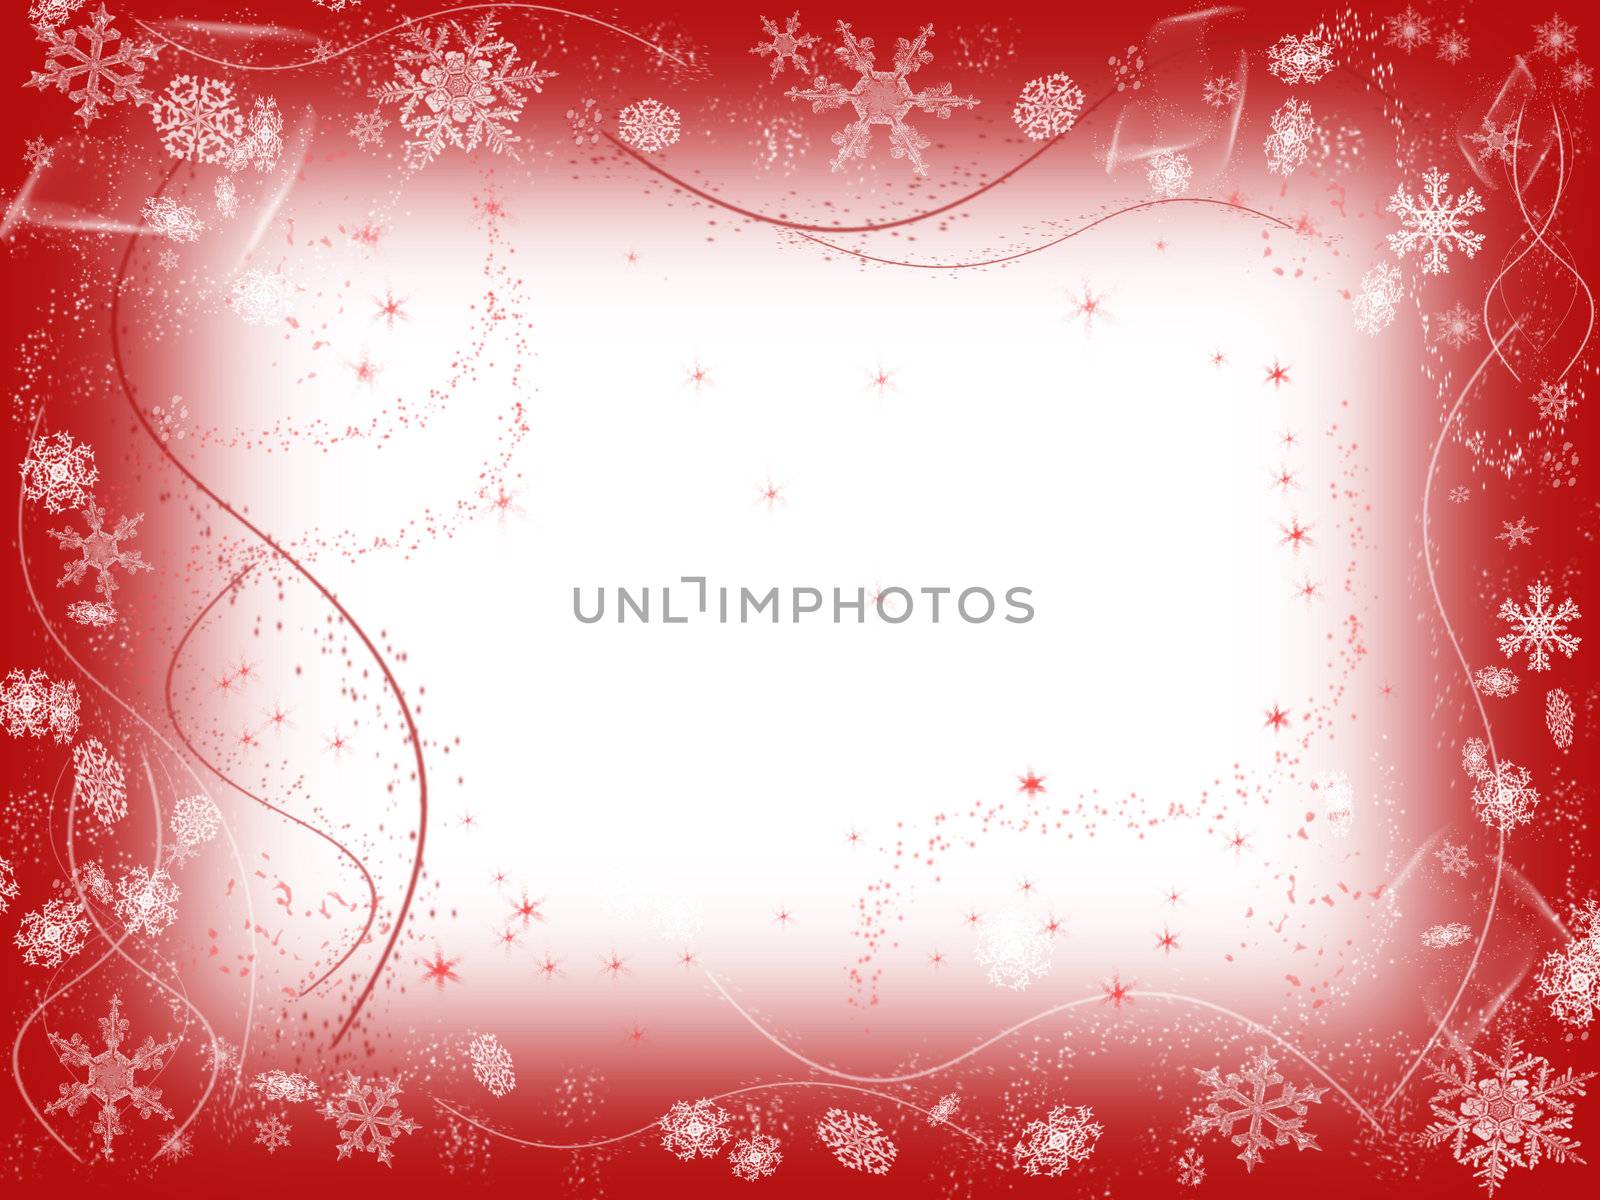 white snowflakes over red background with feather center
